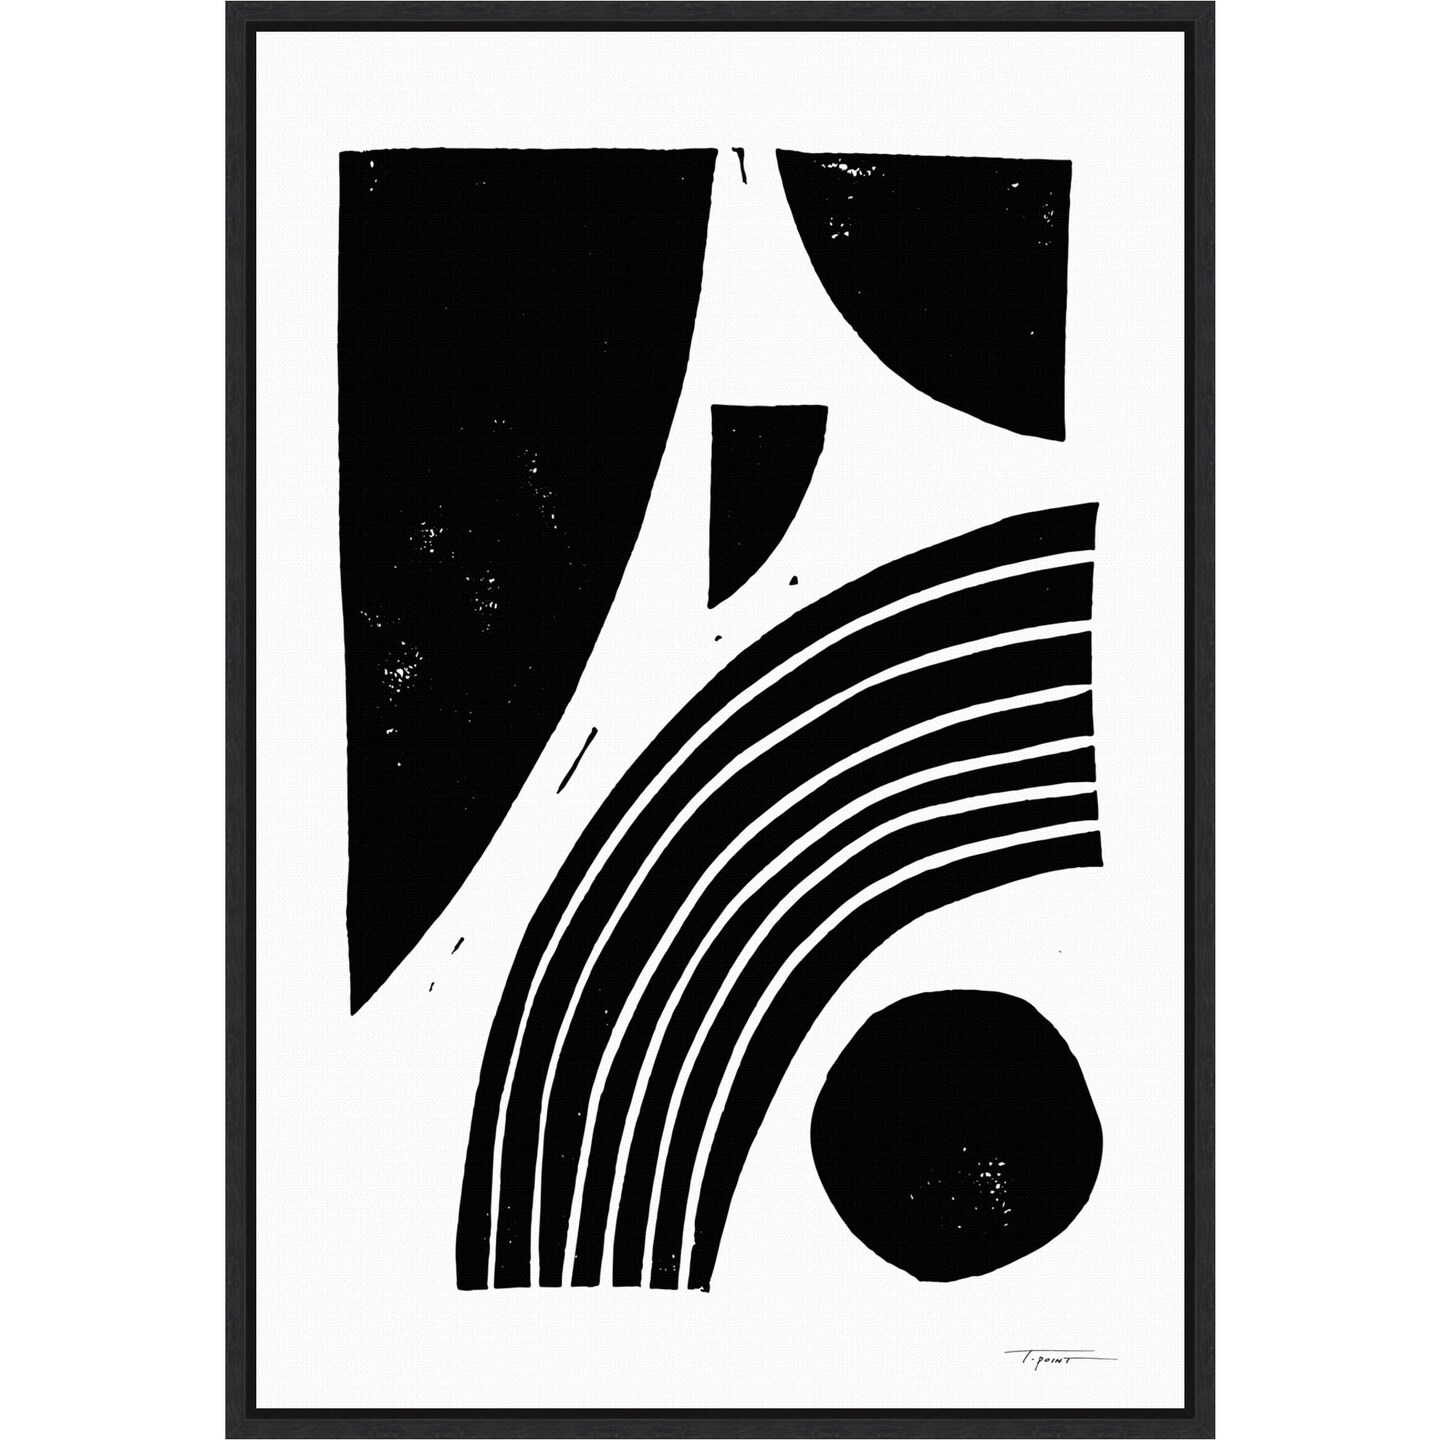 Reflecting Shapes Black by Statement Goods 16-in. W x 23-in. H. Canvas Wall Art Print Framed in Black